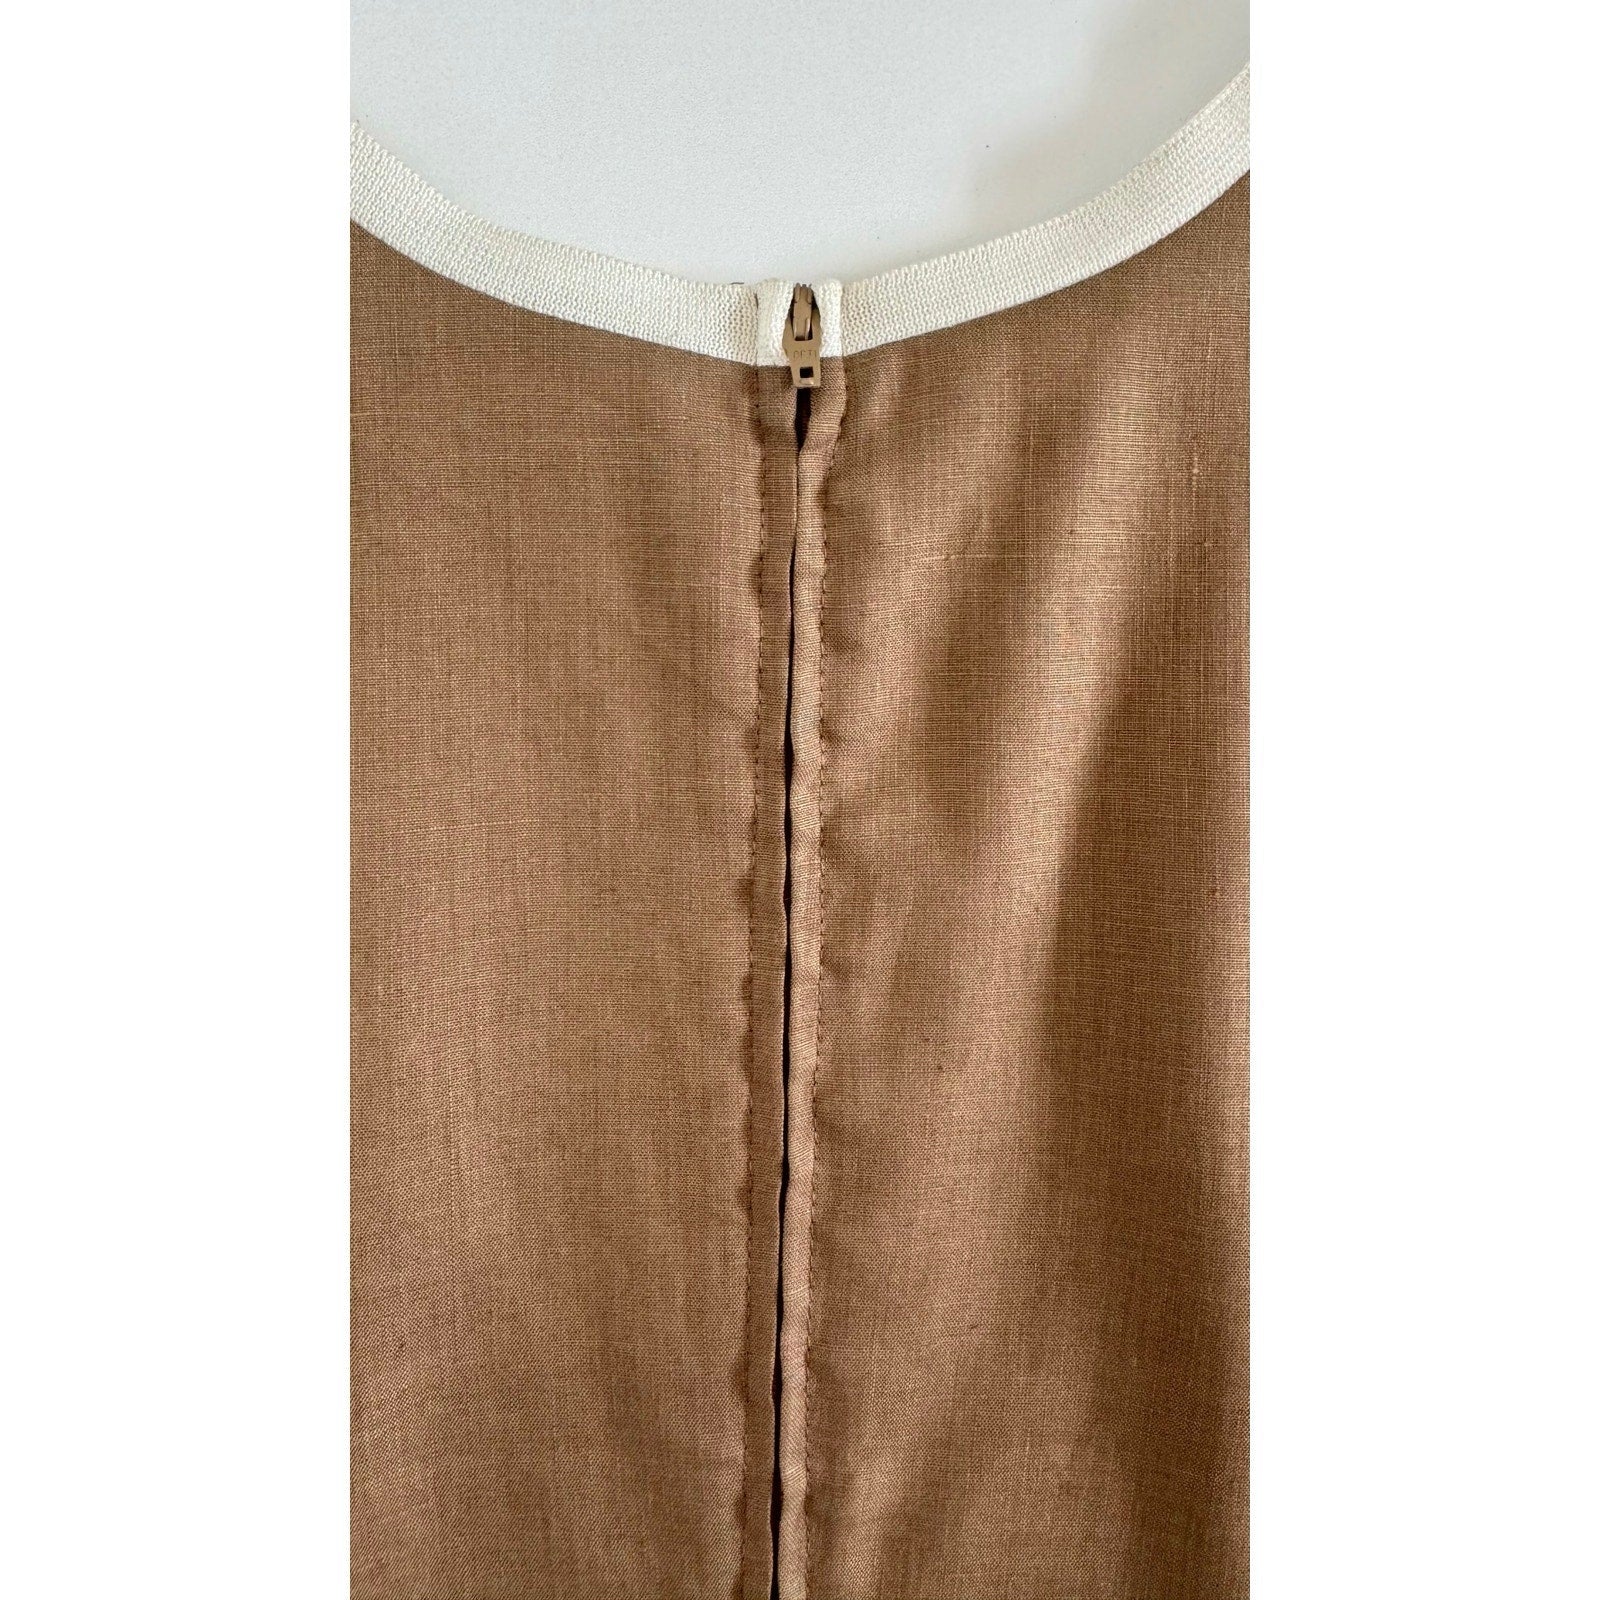 A close-up view of the back of a beige Valentino Miss V Linen Tank Top made of a textured, 100% linen fabric. The garment has a visible central seam with a concealed zipper closure. The fabric is homogenous in color, and the small metallic zipper pull sits just below a white lining at the collar, reminiscent of vintage Valentino Miss V craftsmanship.